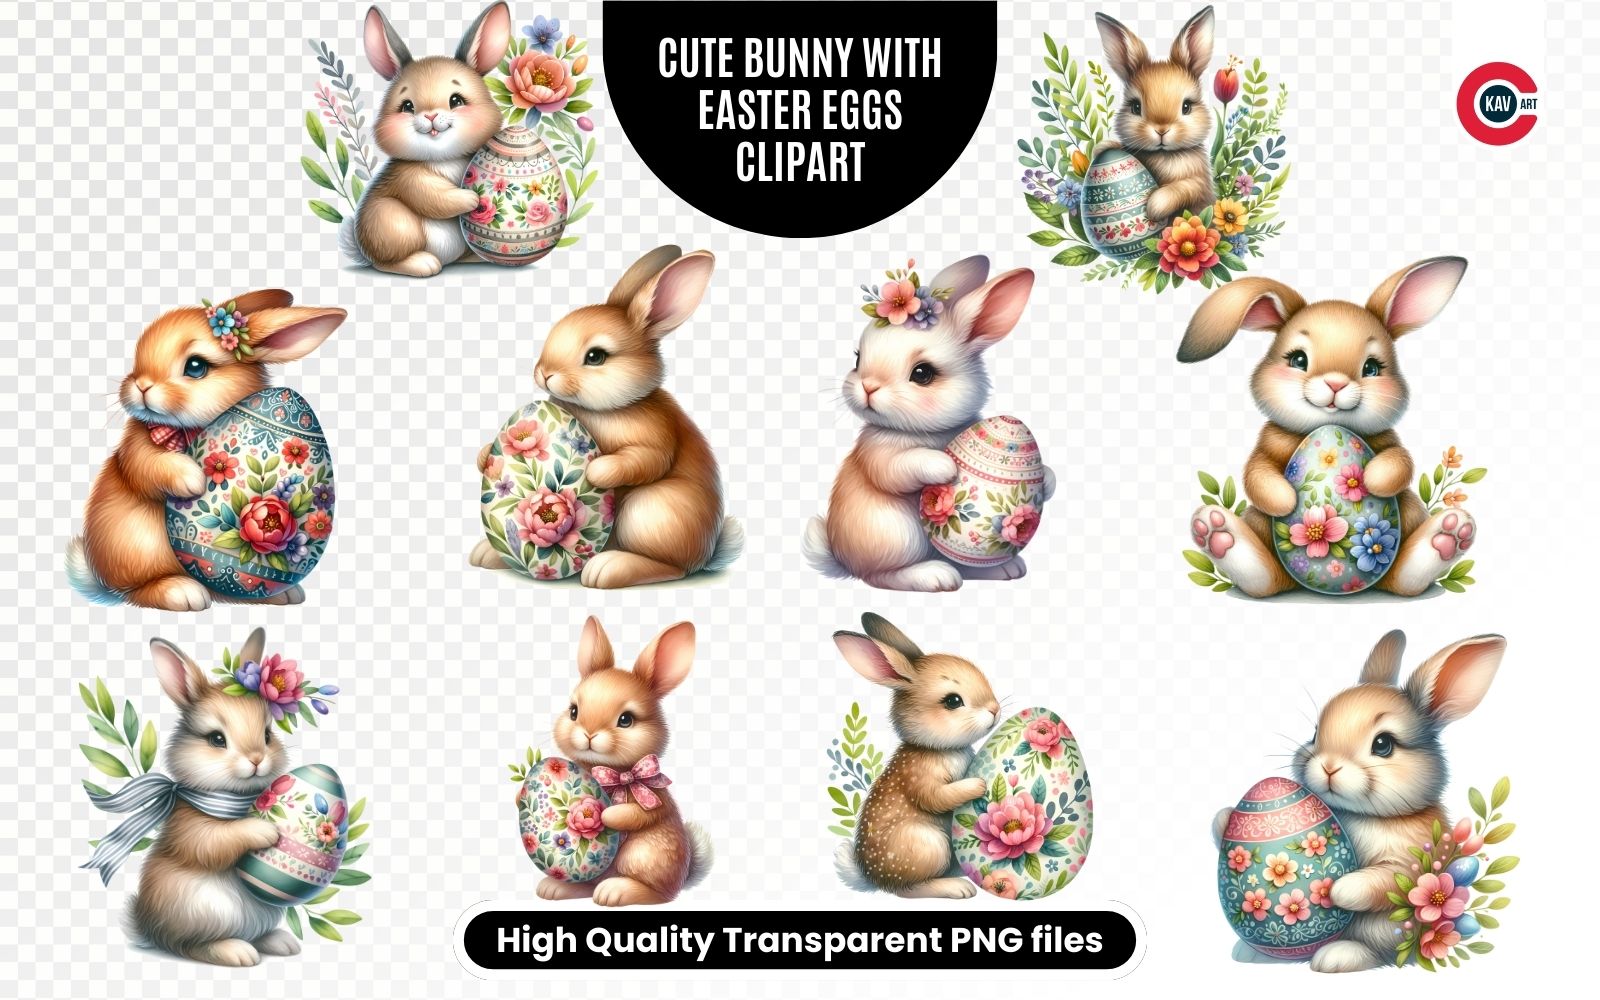 Hoppy Easter, Adorable Bunny with Easter Egg Clipart